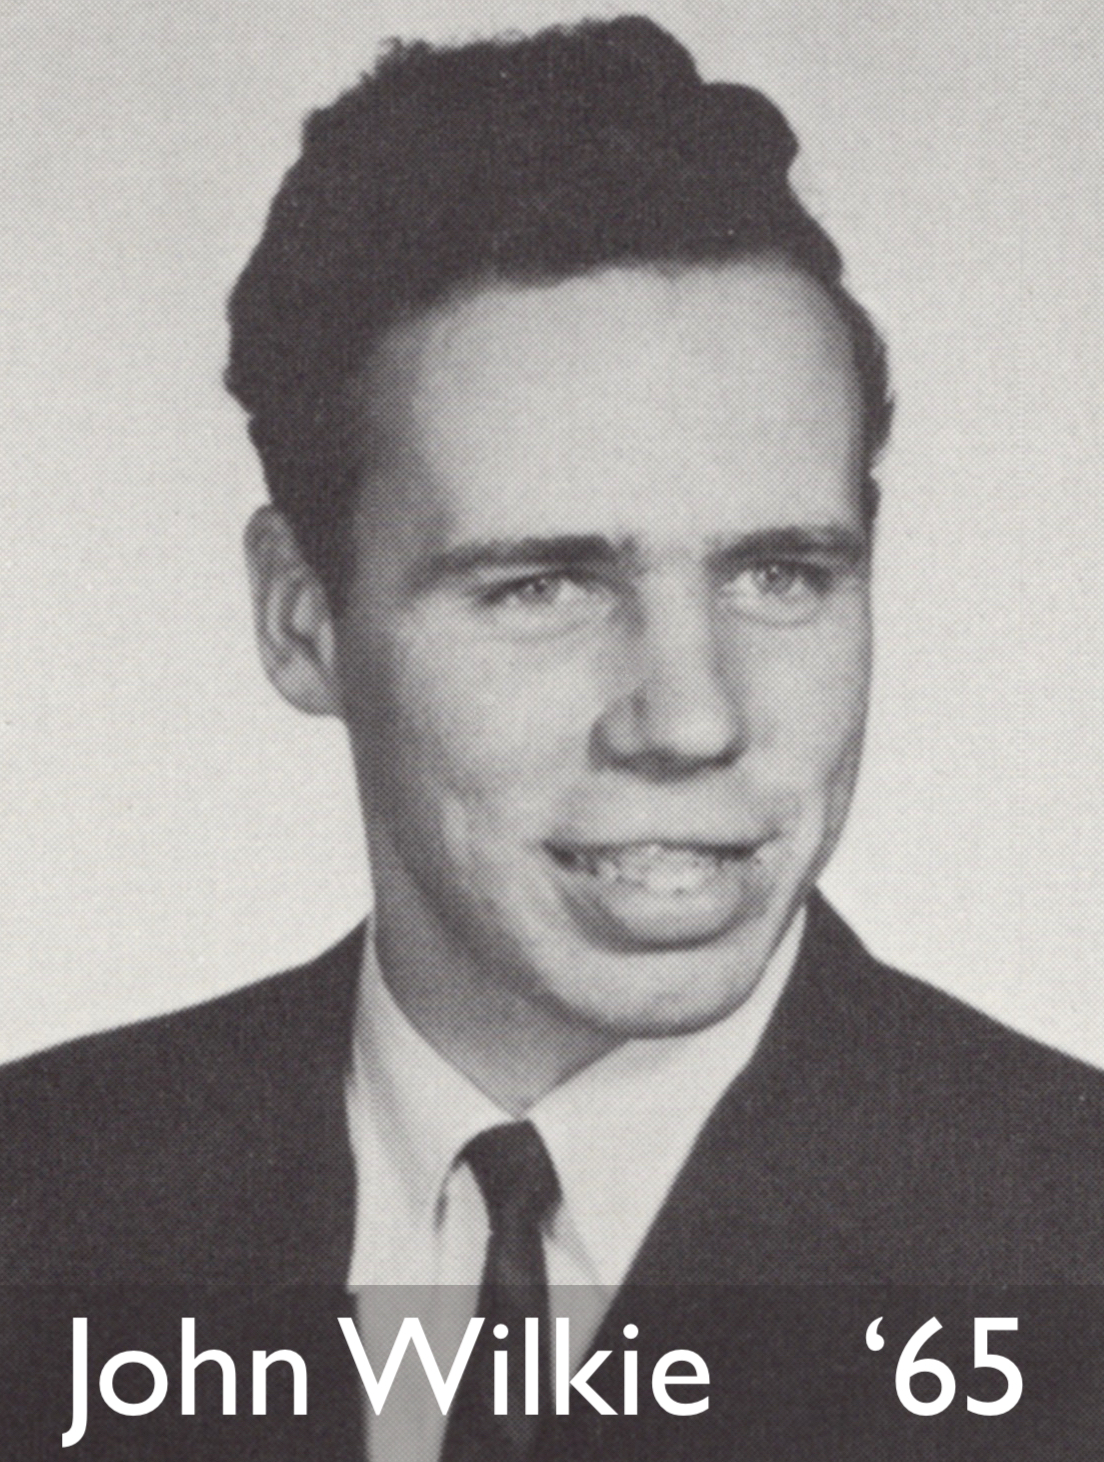 Photo of John Wilkie from the 1965 NU Yearbook